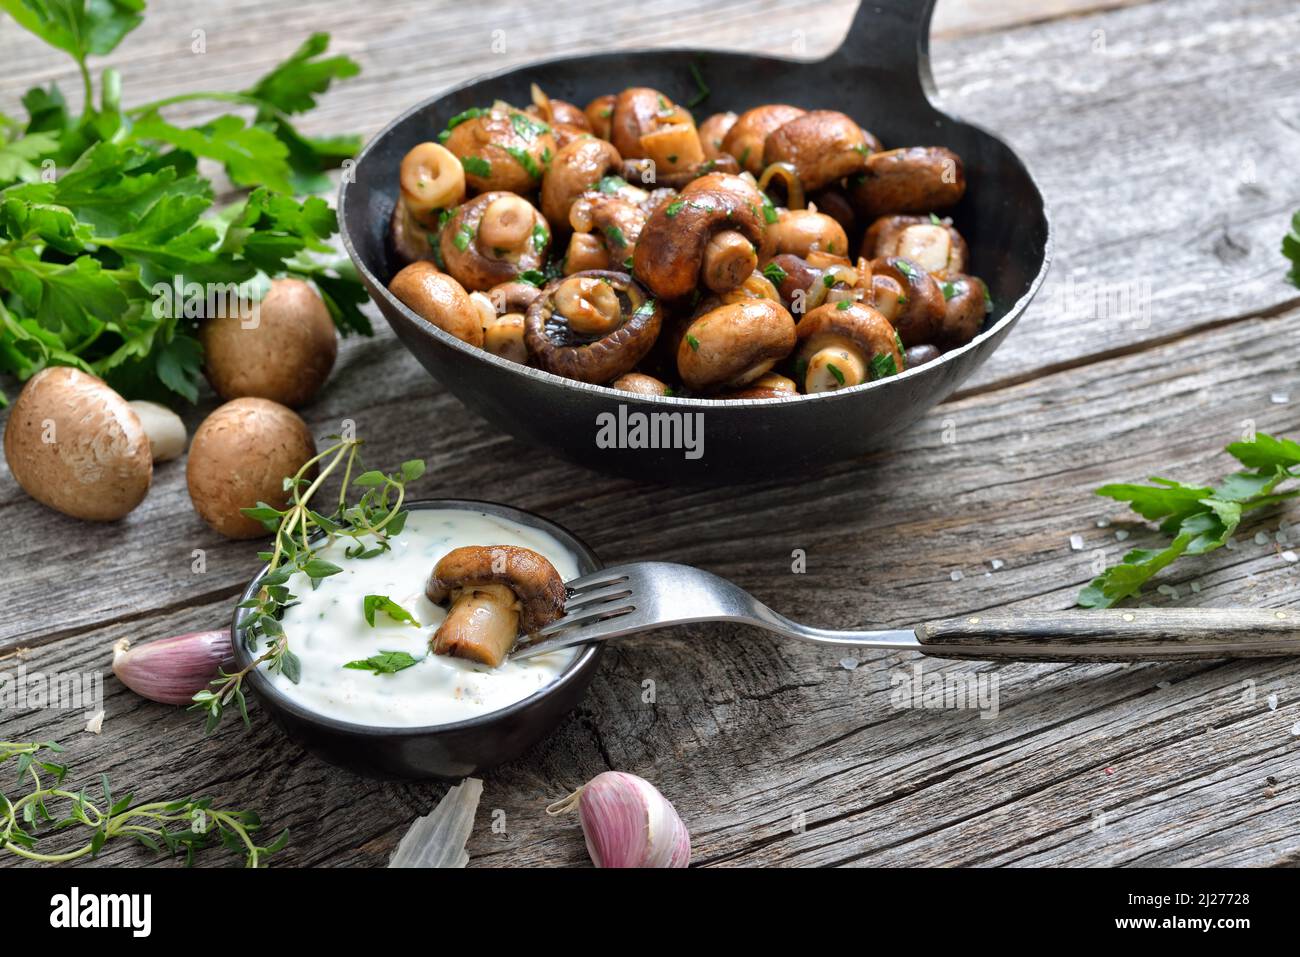 Fried mushrooms with shallots and parsley, served with a sour cream dip with herbs and garlic Stock Photo